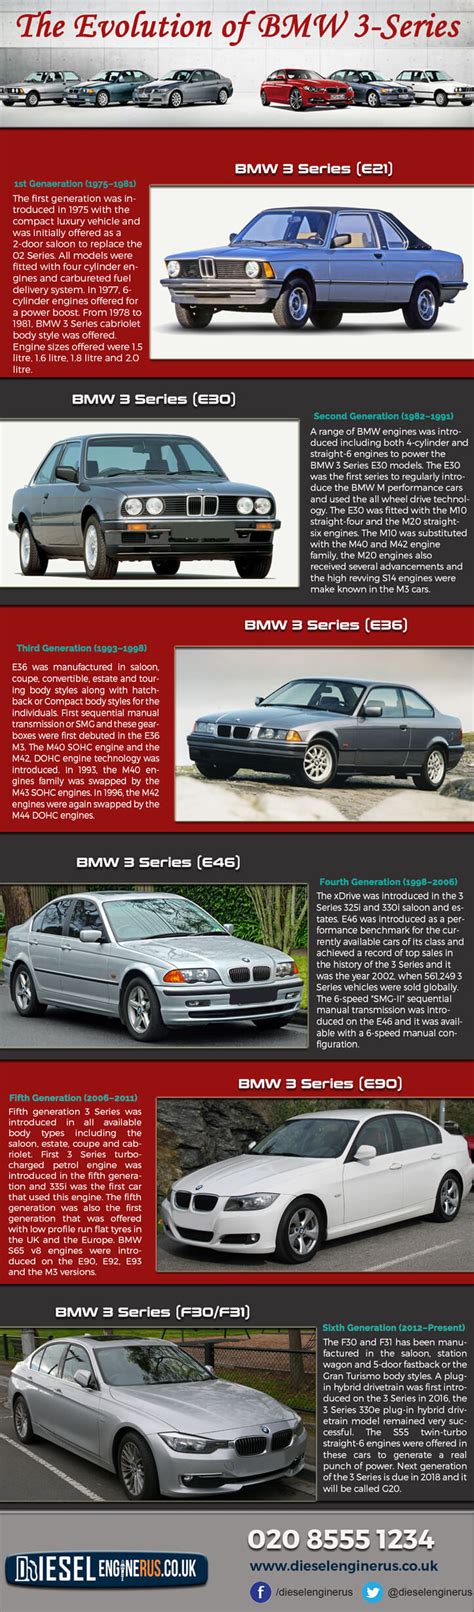 Evolution Of The Legendary Bmw 3 Series Infographic